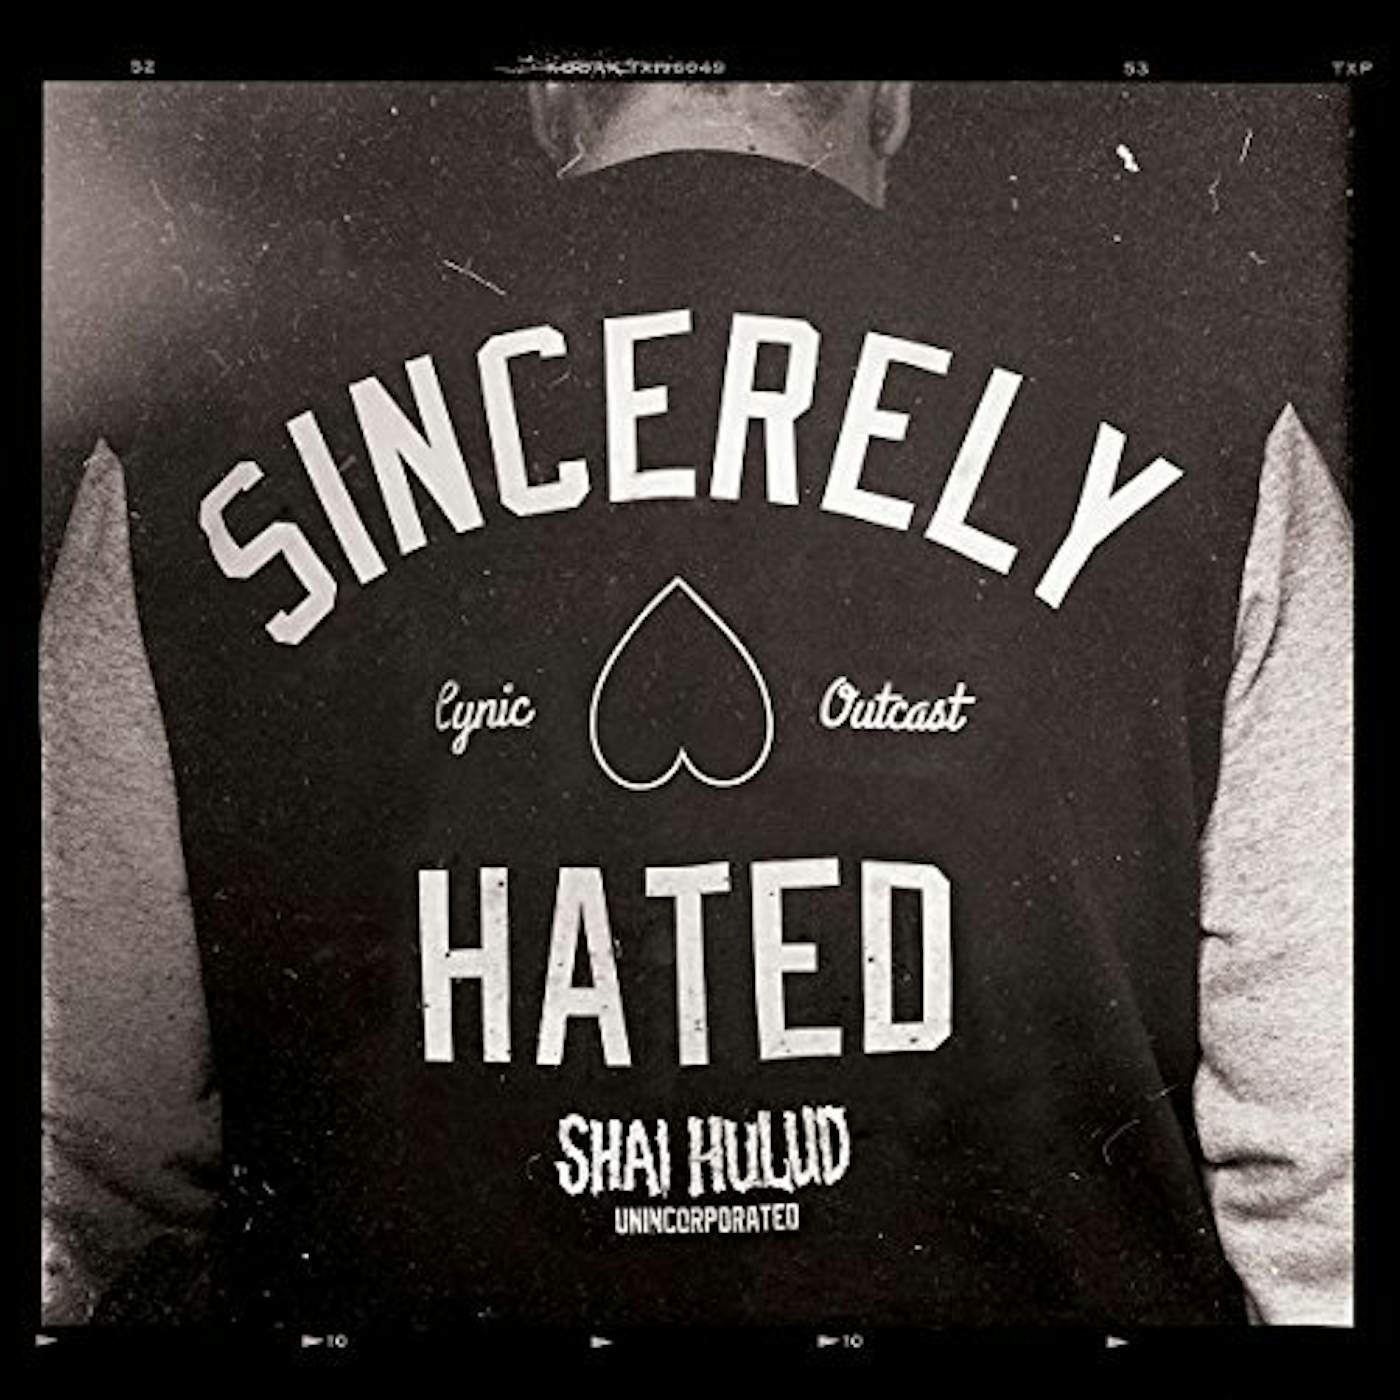 Shai Hulud JUST CAN'T HATE ENOUGH X2 - PLUS OTHER HATE SONGS Vinyl Record